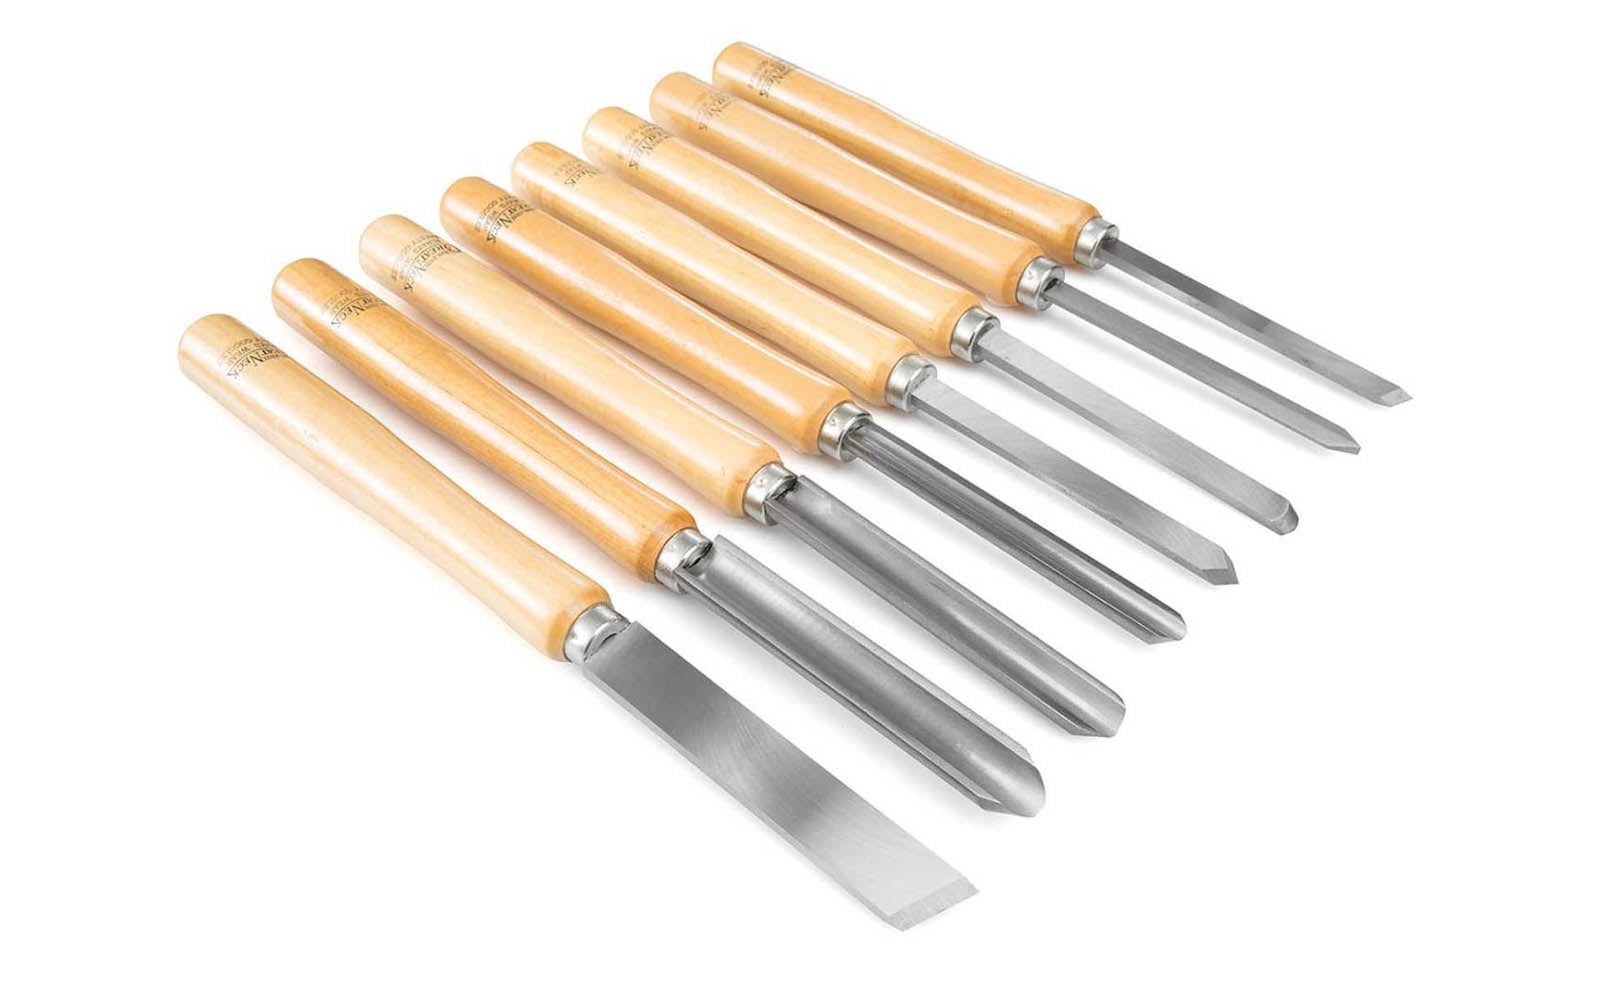 8-piece Wood Turning Tool Set Made by Buck Bros. in USA for GreatNeck Tools. Made of high carbon alloy tool steel. Ground, sharpened, hardened & tempered. Includes: 1/2" Skew, 1/2" Parting Tool, 1/2" Round Nose, 1/2" Spear, 3/8" Gouge, 1" Gouge, 1" Skew. Wooden handles are kiln-dried hardwood handles. Model No. 800